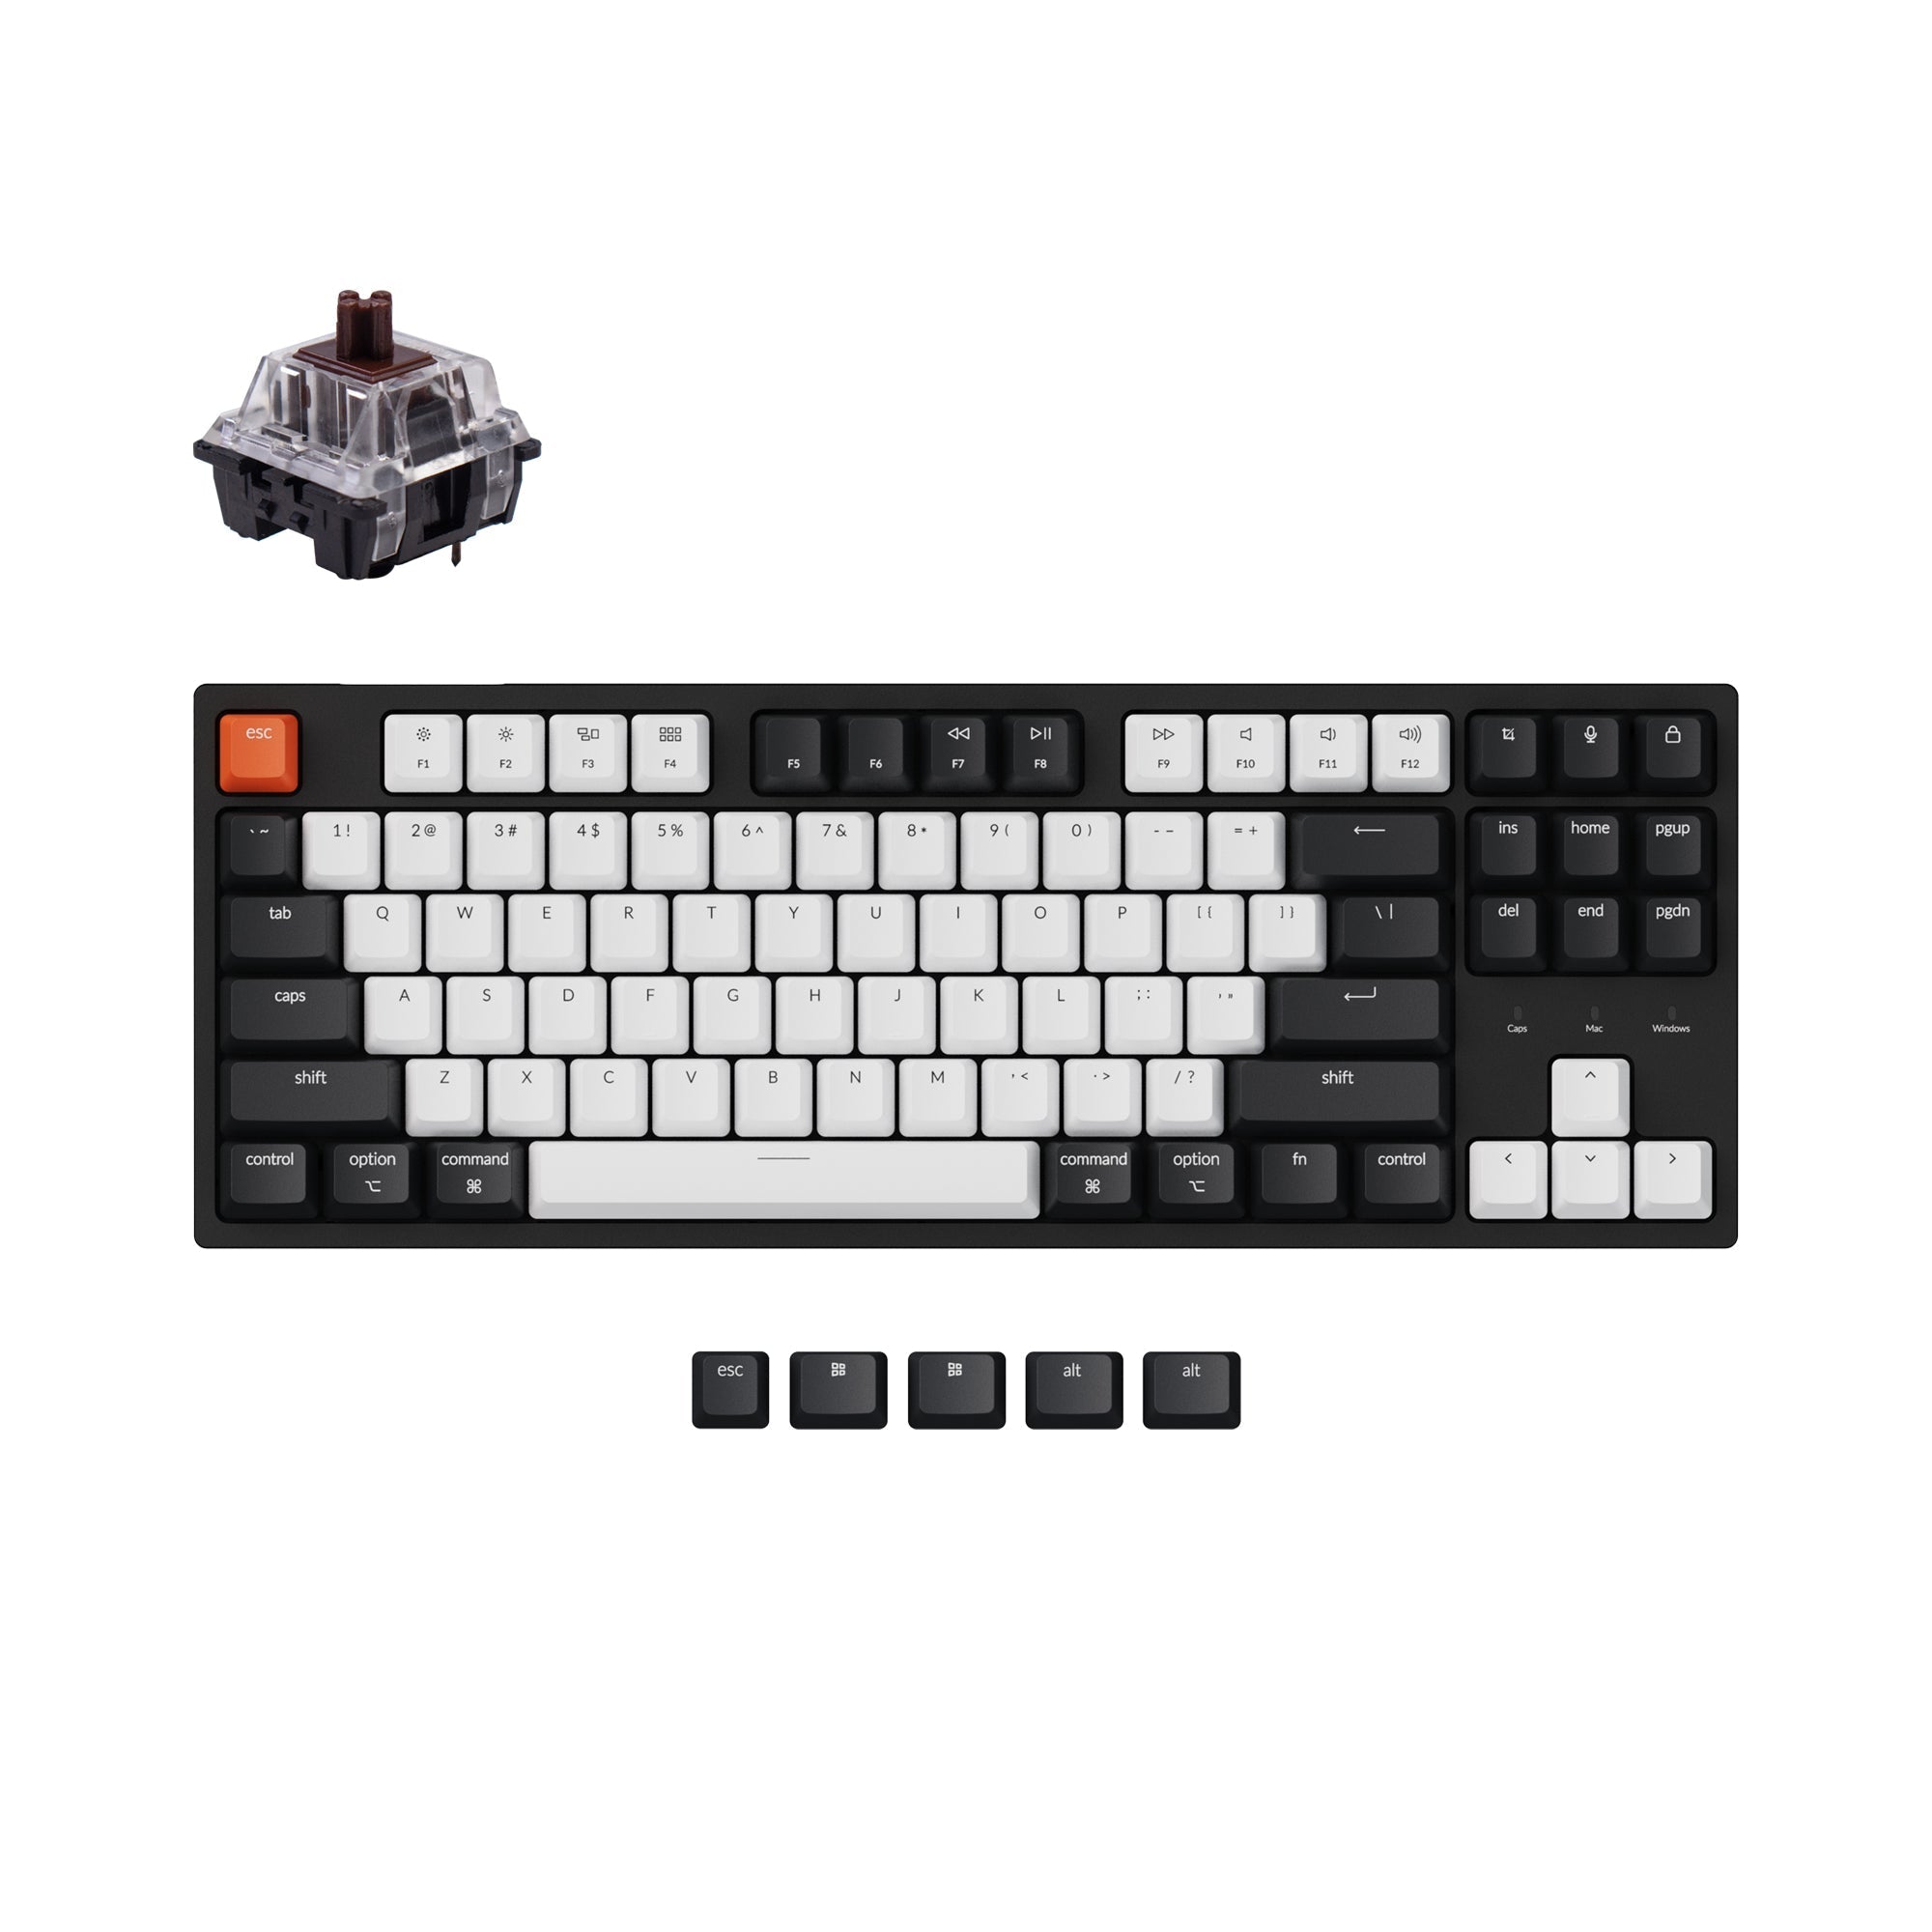  Keychron c1 hot swappable wired wireless mechanical keyboard tenkeyless layout for Mac Windows non backlight Keychron switch brown